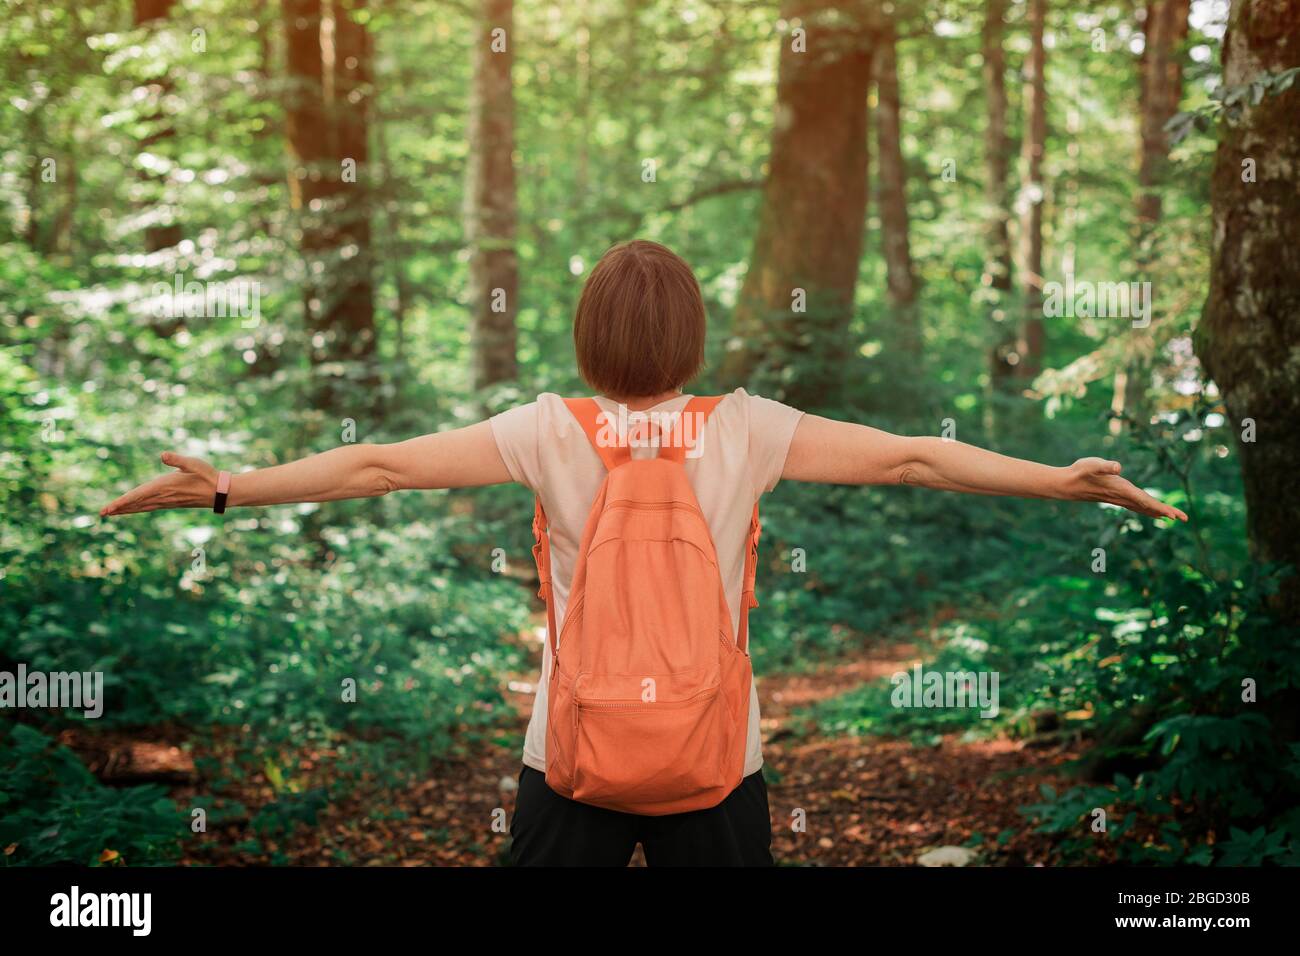 Female hiker with wide spread hands in forest, rear view of woman enjoying outdoor pursuit Stock Photo